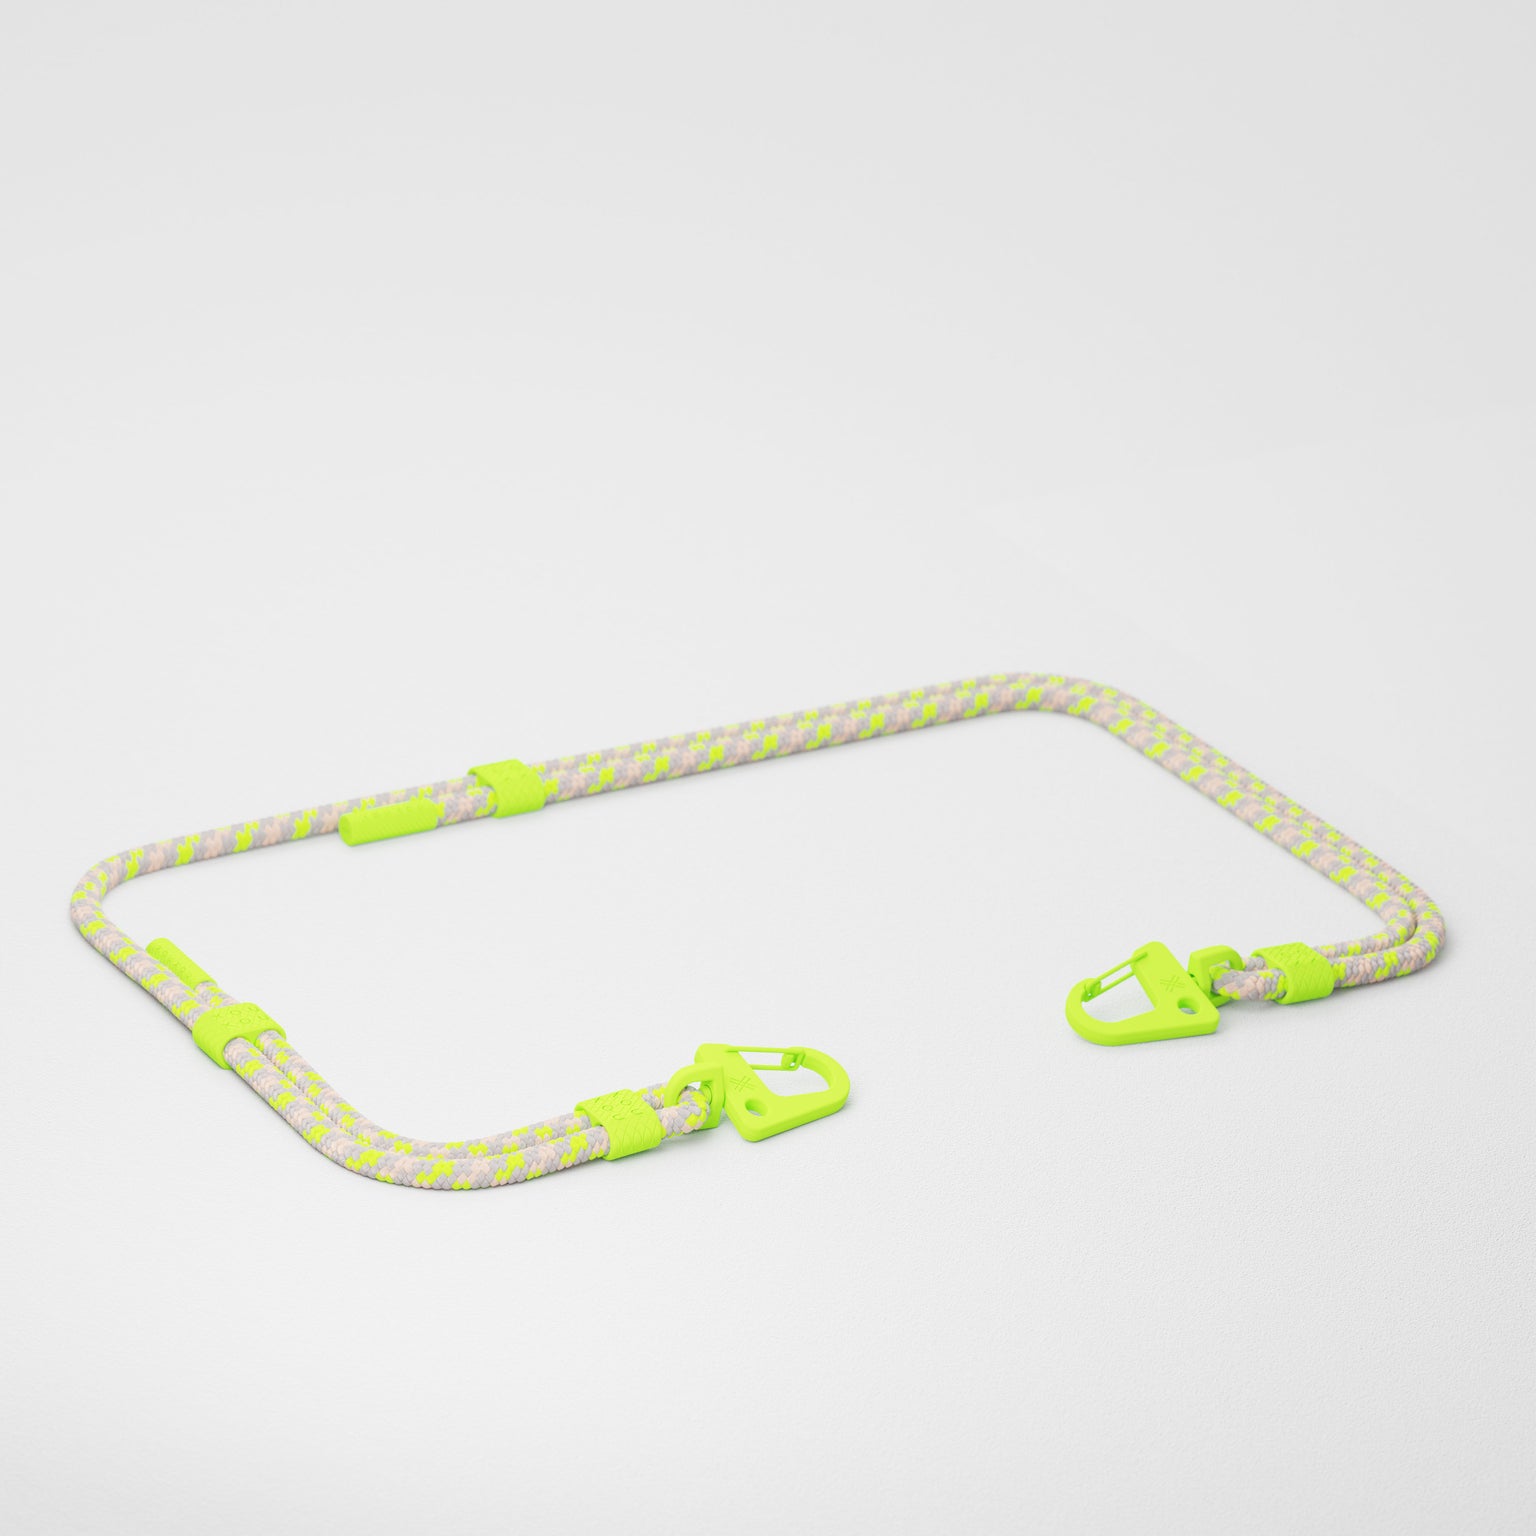 Neon Camouflage Carabiner Rope